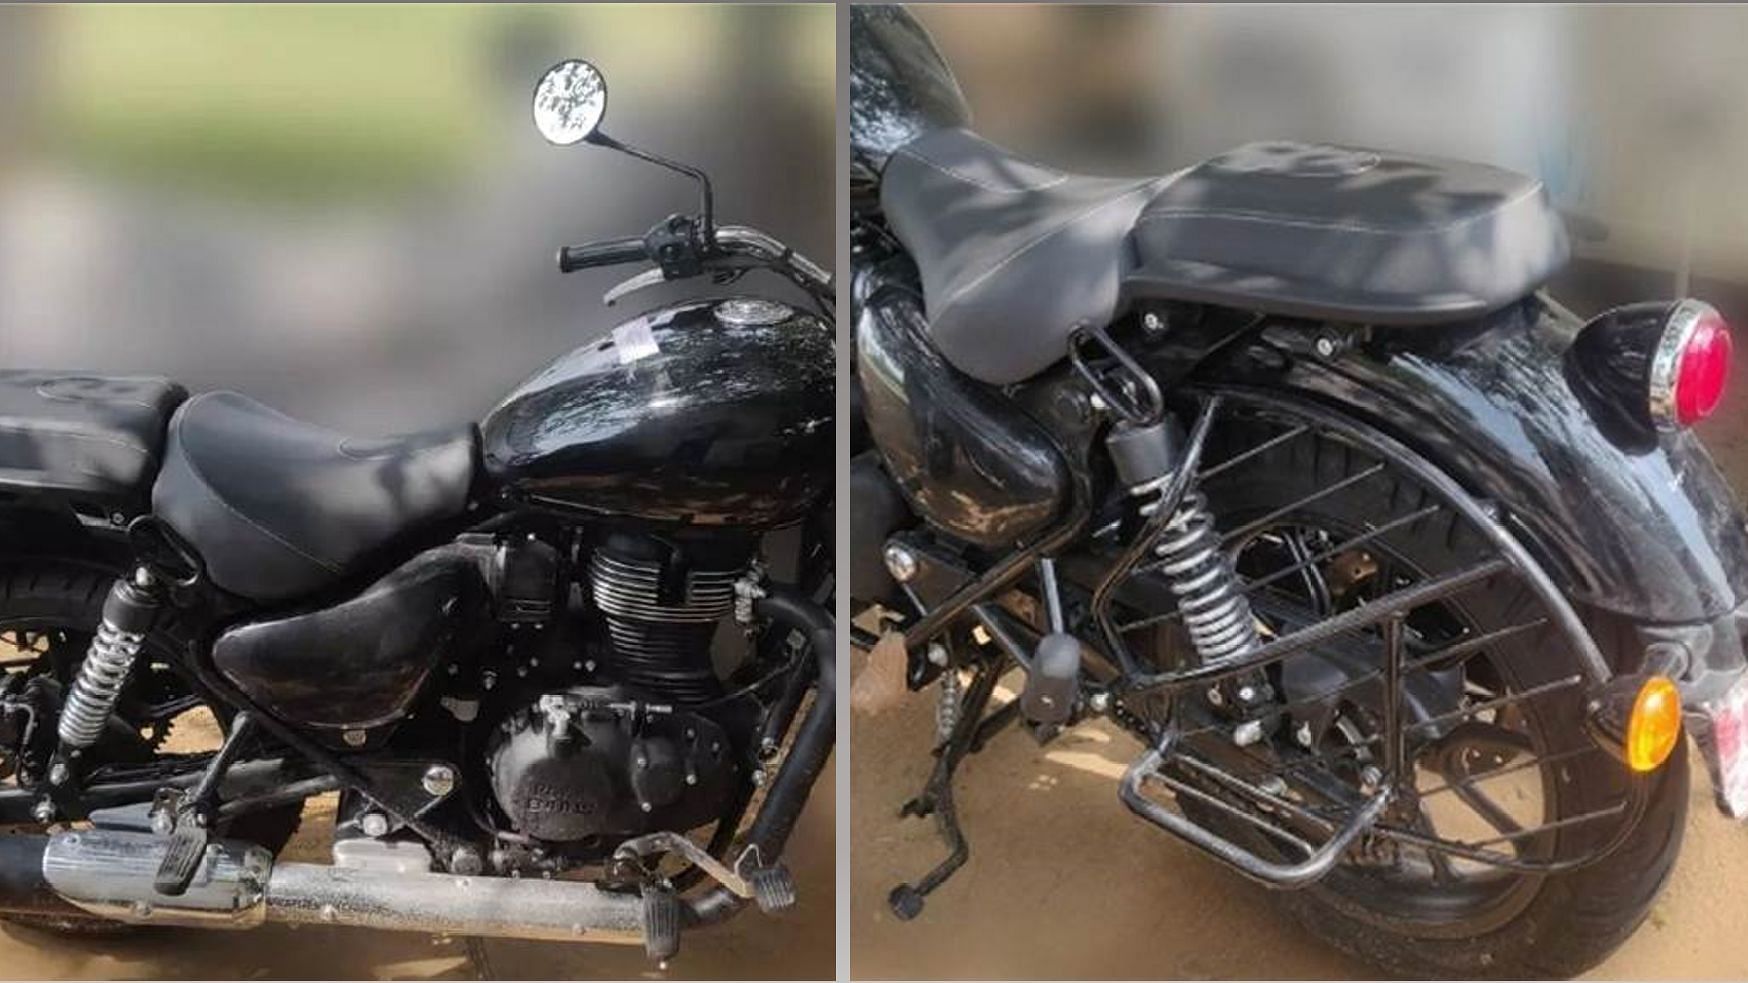 The Royal Enfield Thunderbird gets a new engine and a new design too.